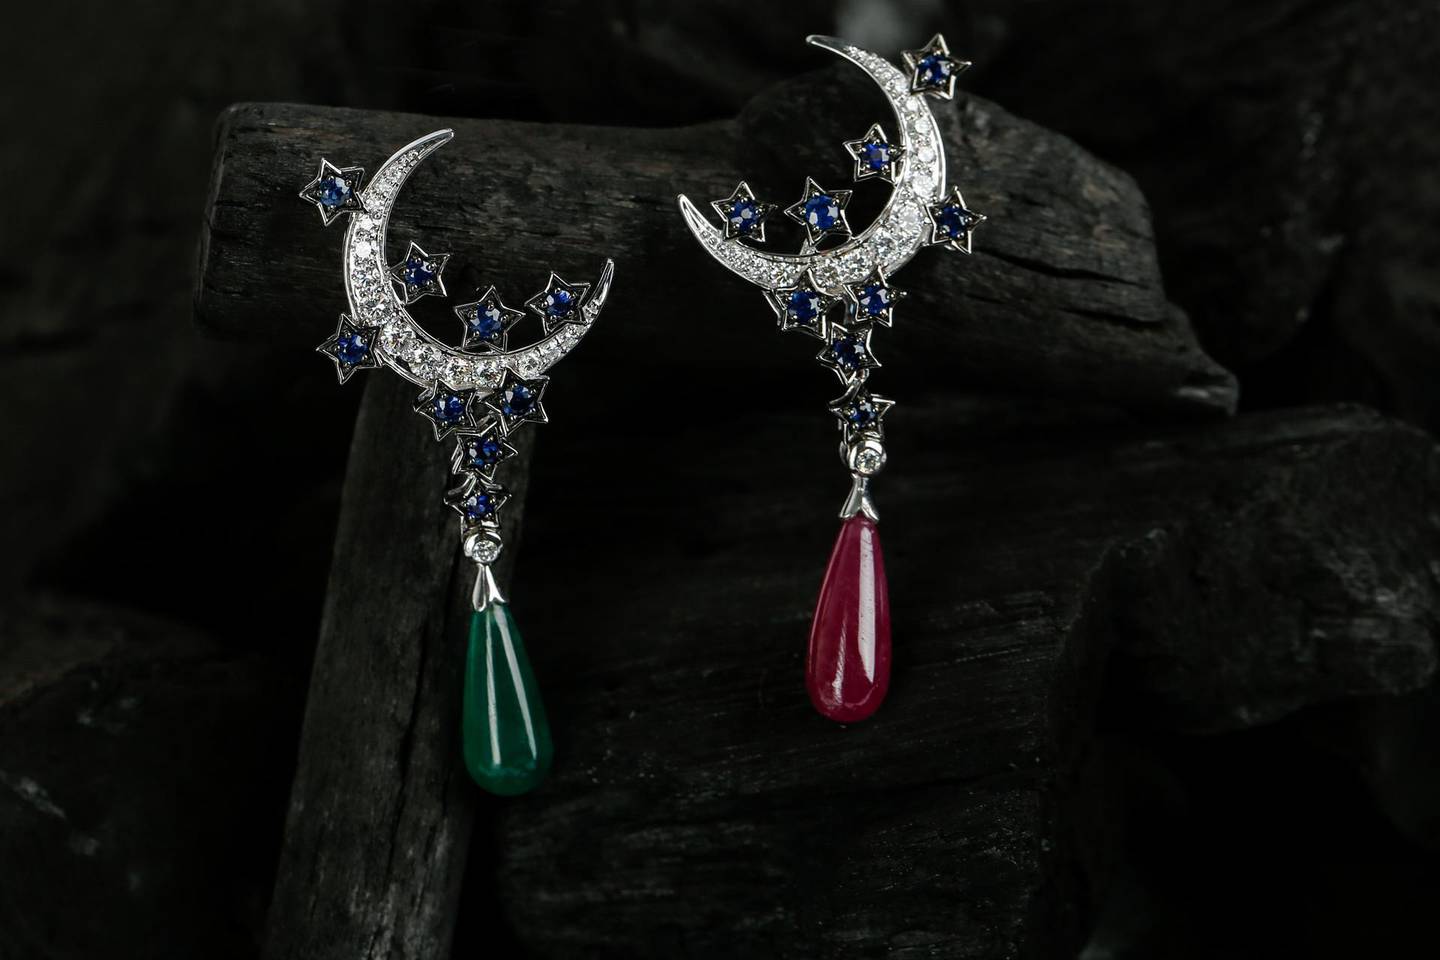 National Day Collection: 18K white gold earrings with stars studded in blue sapphires and with a cabochon emerald and ruby drop from 55Fifty7